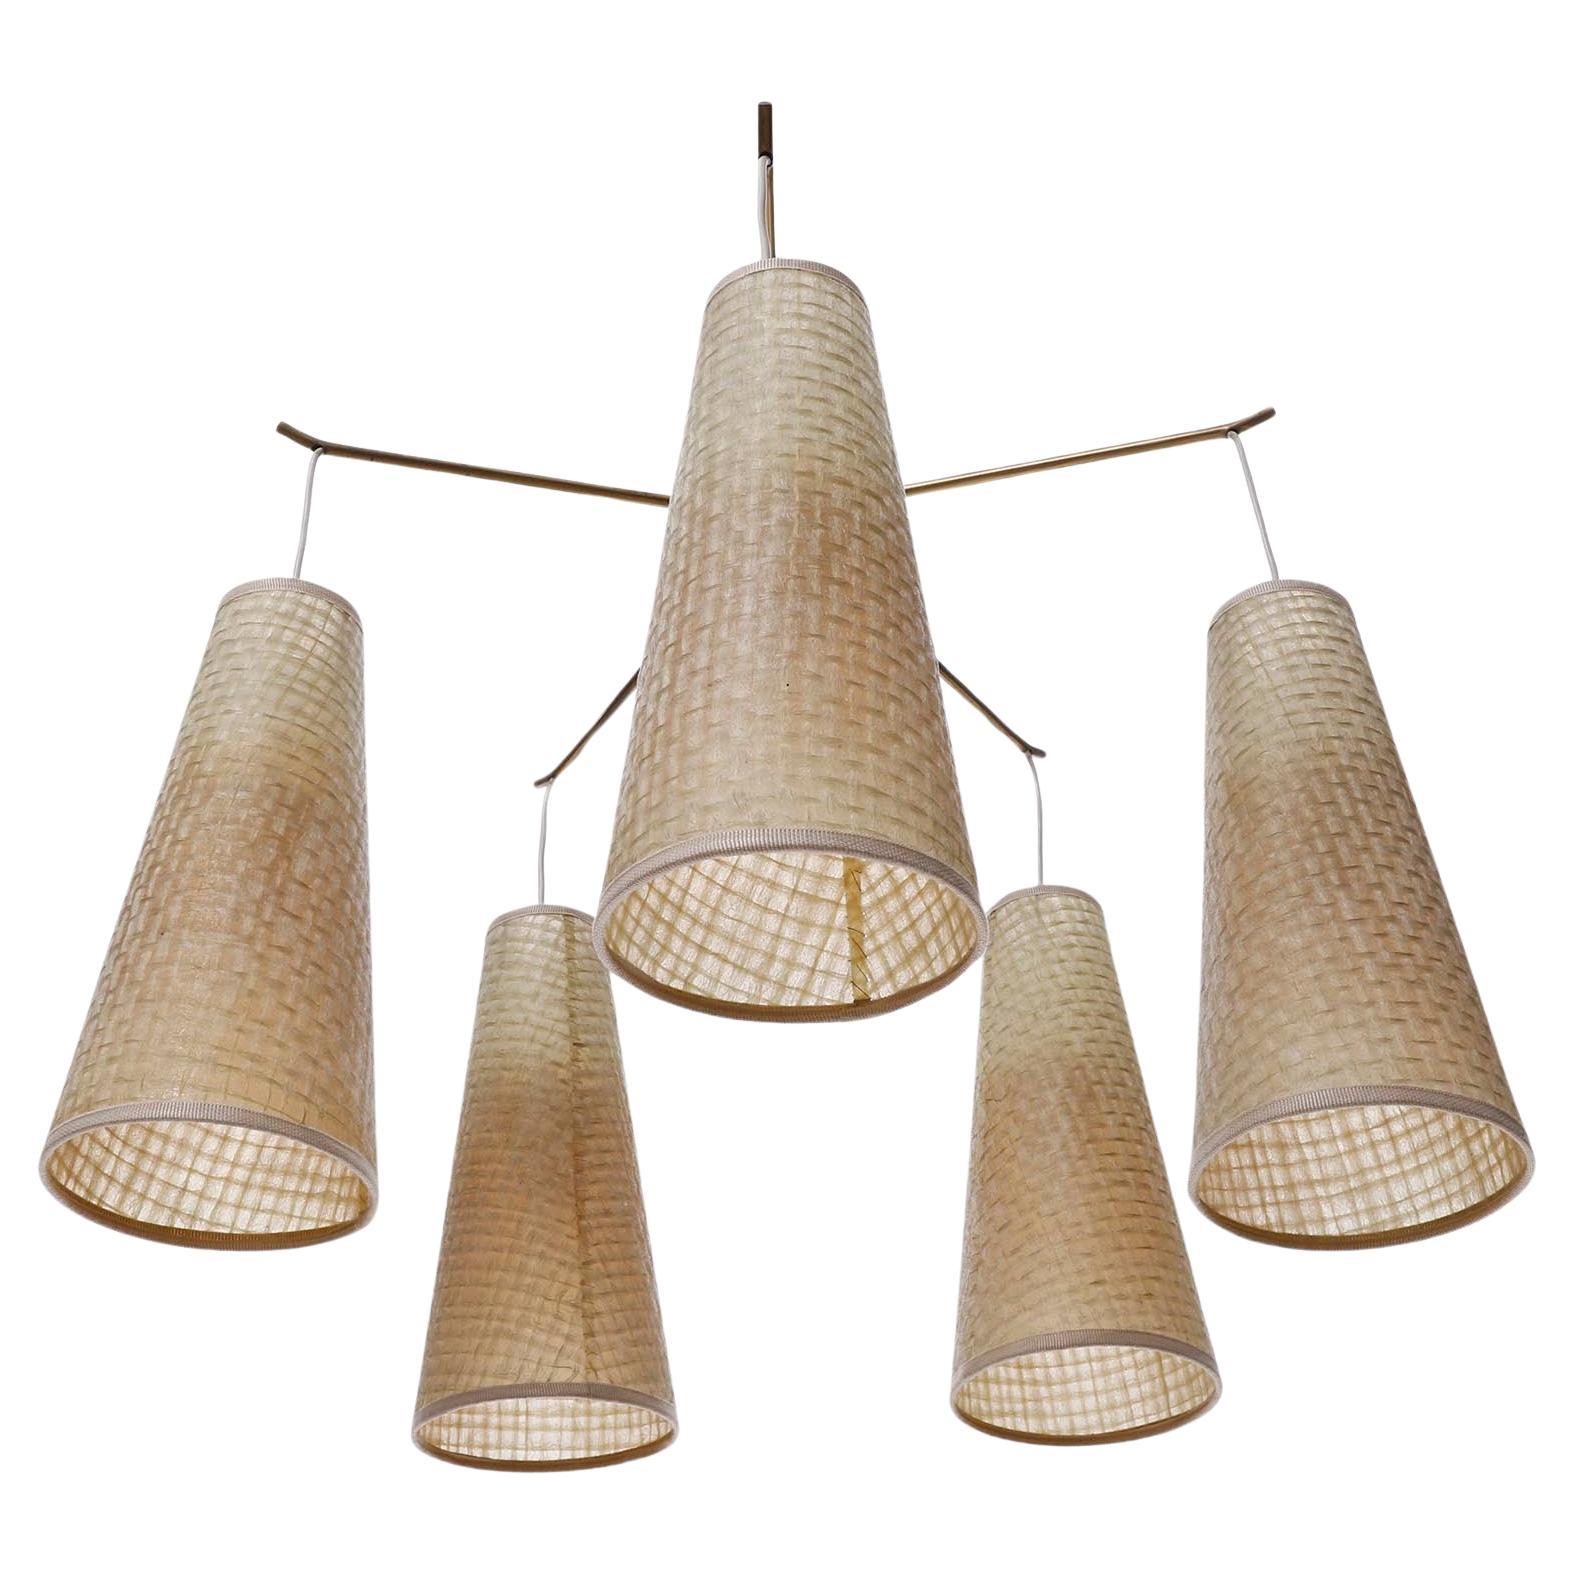 A brass ceiling or flush mount light model 'POLKA' no. 5180/5 with five arms and braided lamp shades by J.T. Kalmar, Vienna, Austria, manufactured in midcentury, ca. 1960 (late 1950s or early 1960s).
The light is documented in the Kalmar catalogue